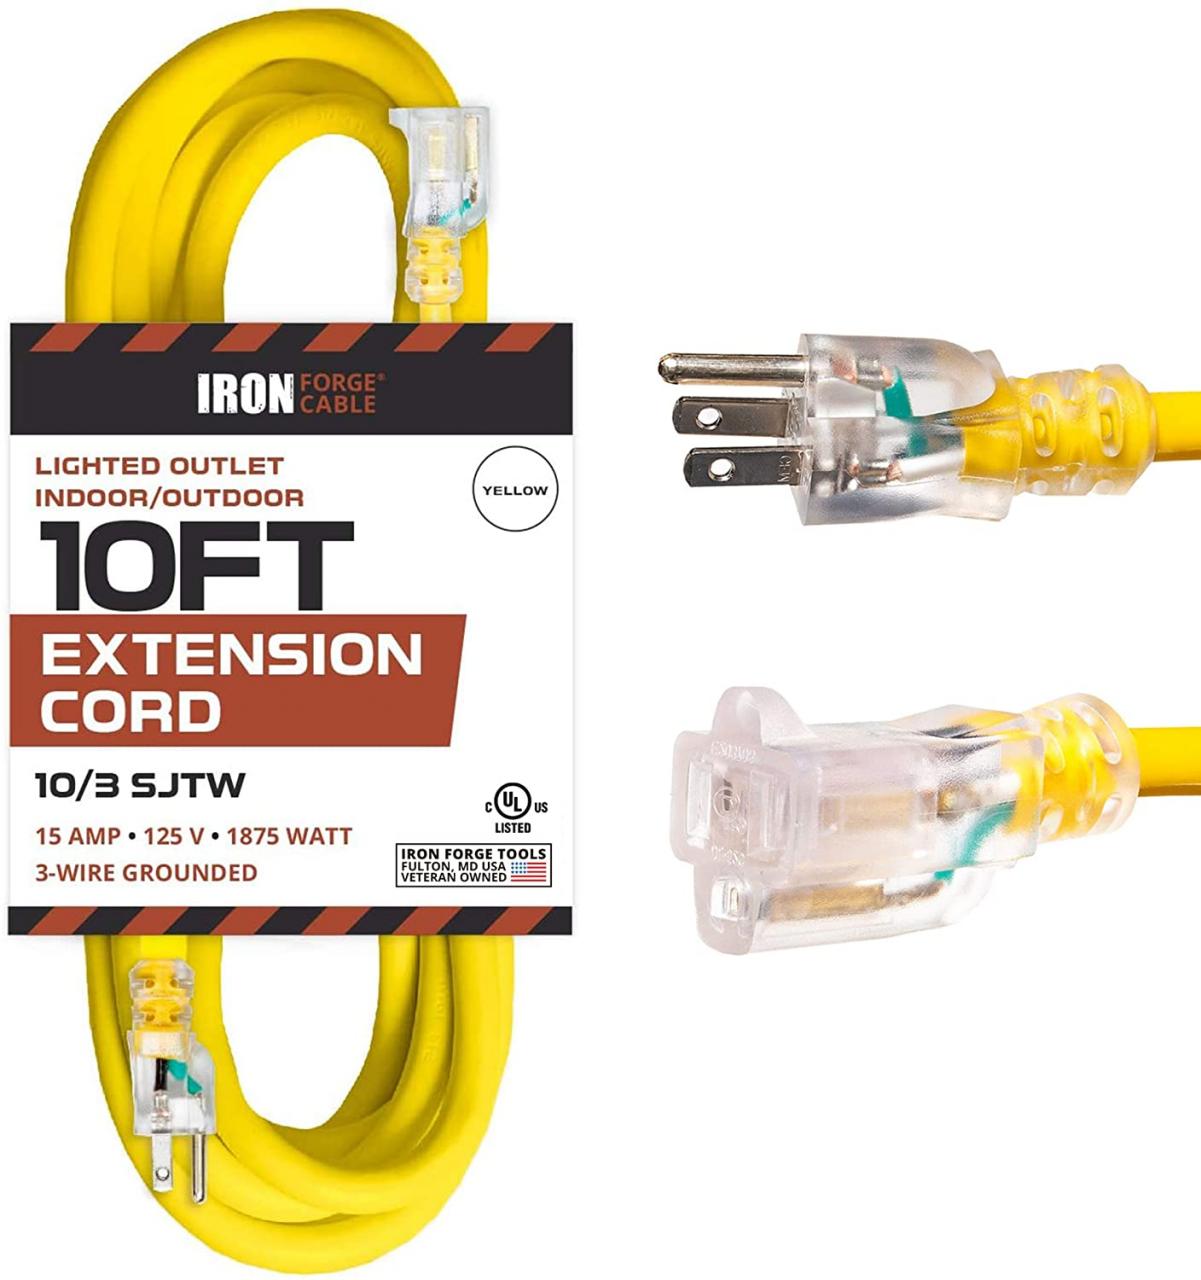 200 Foot Lighted Outdoor Extension Cord - 10/3 SJTW Yellow 10 Gauge Ex - iron  forge tools